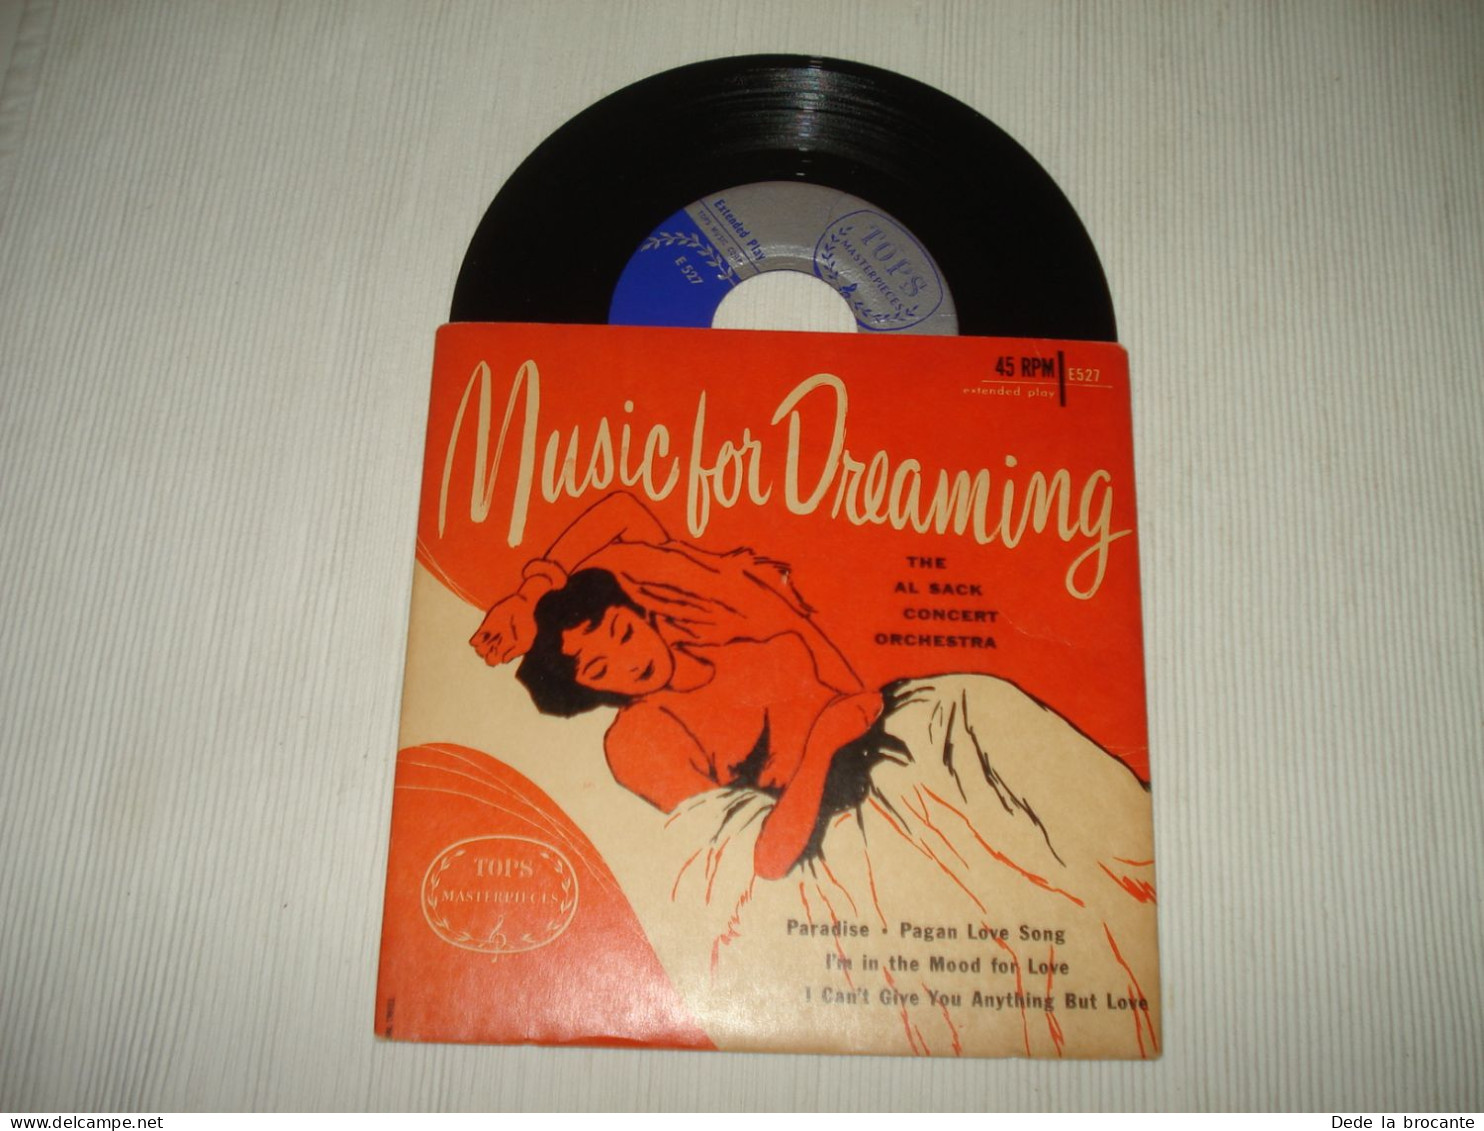 B13 / Al Sack His Concert Orch.  Music For Dreaming - EP – E 527 - US 1957 NM/NM - Special Formats